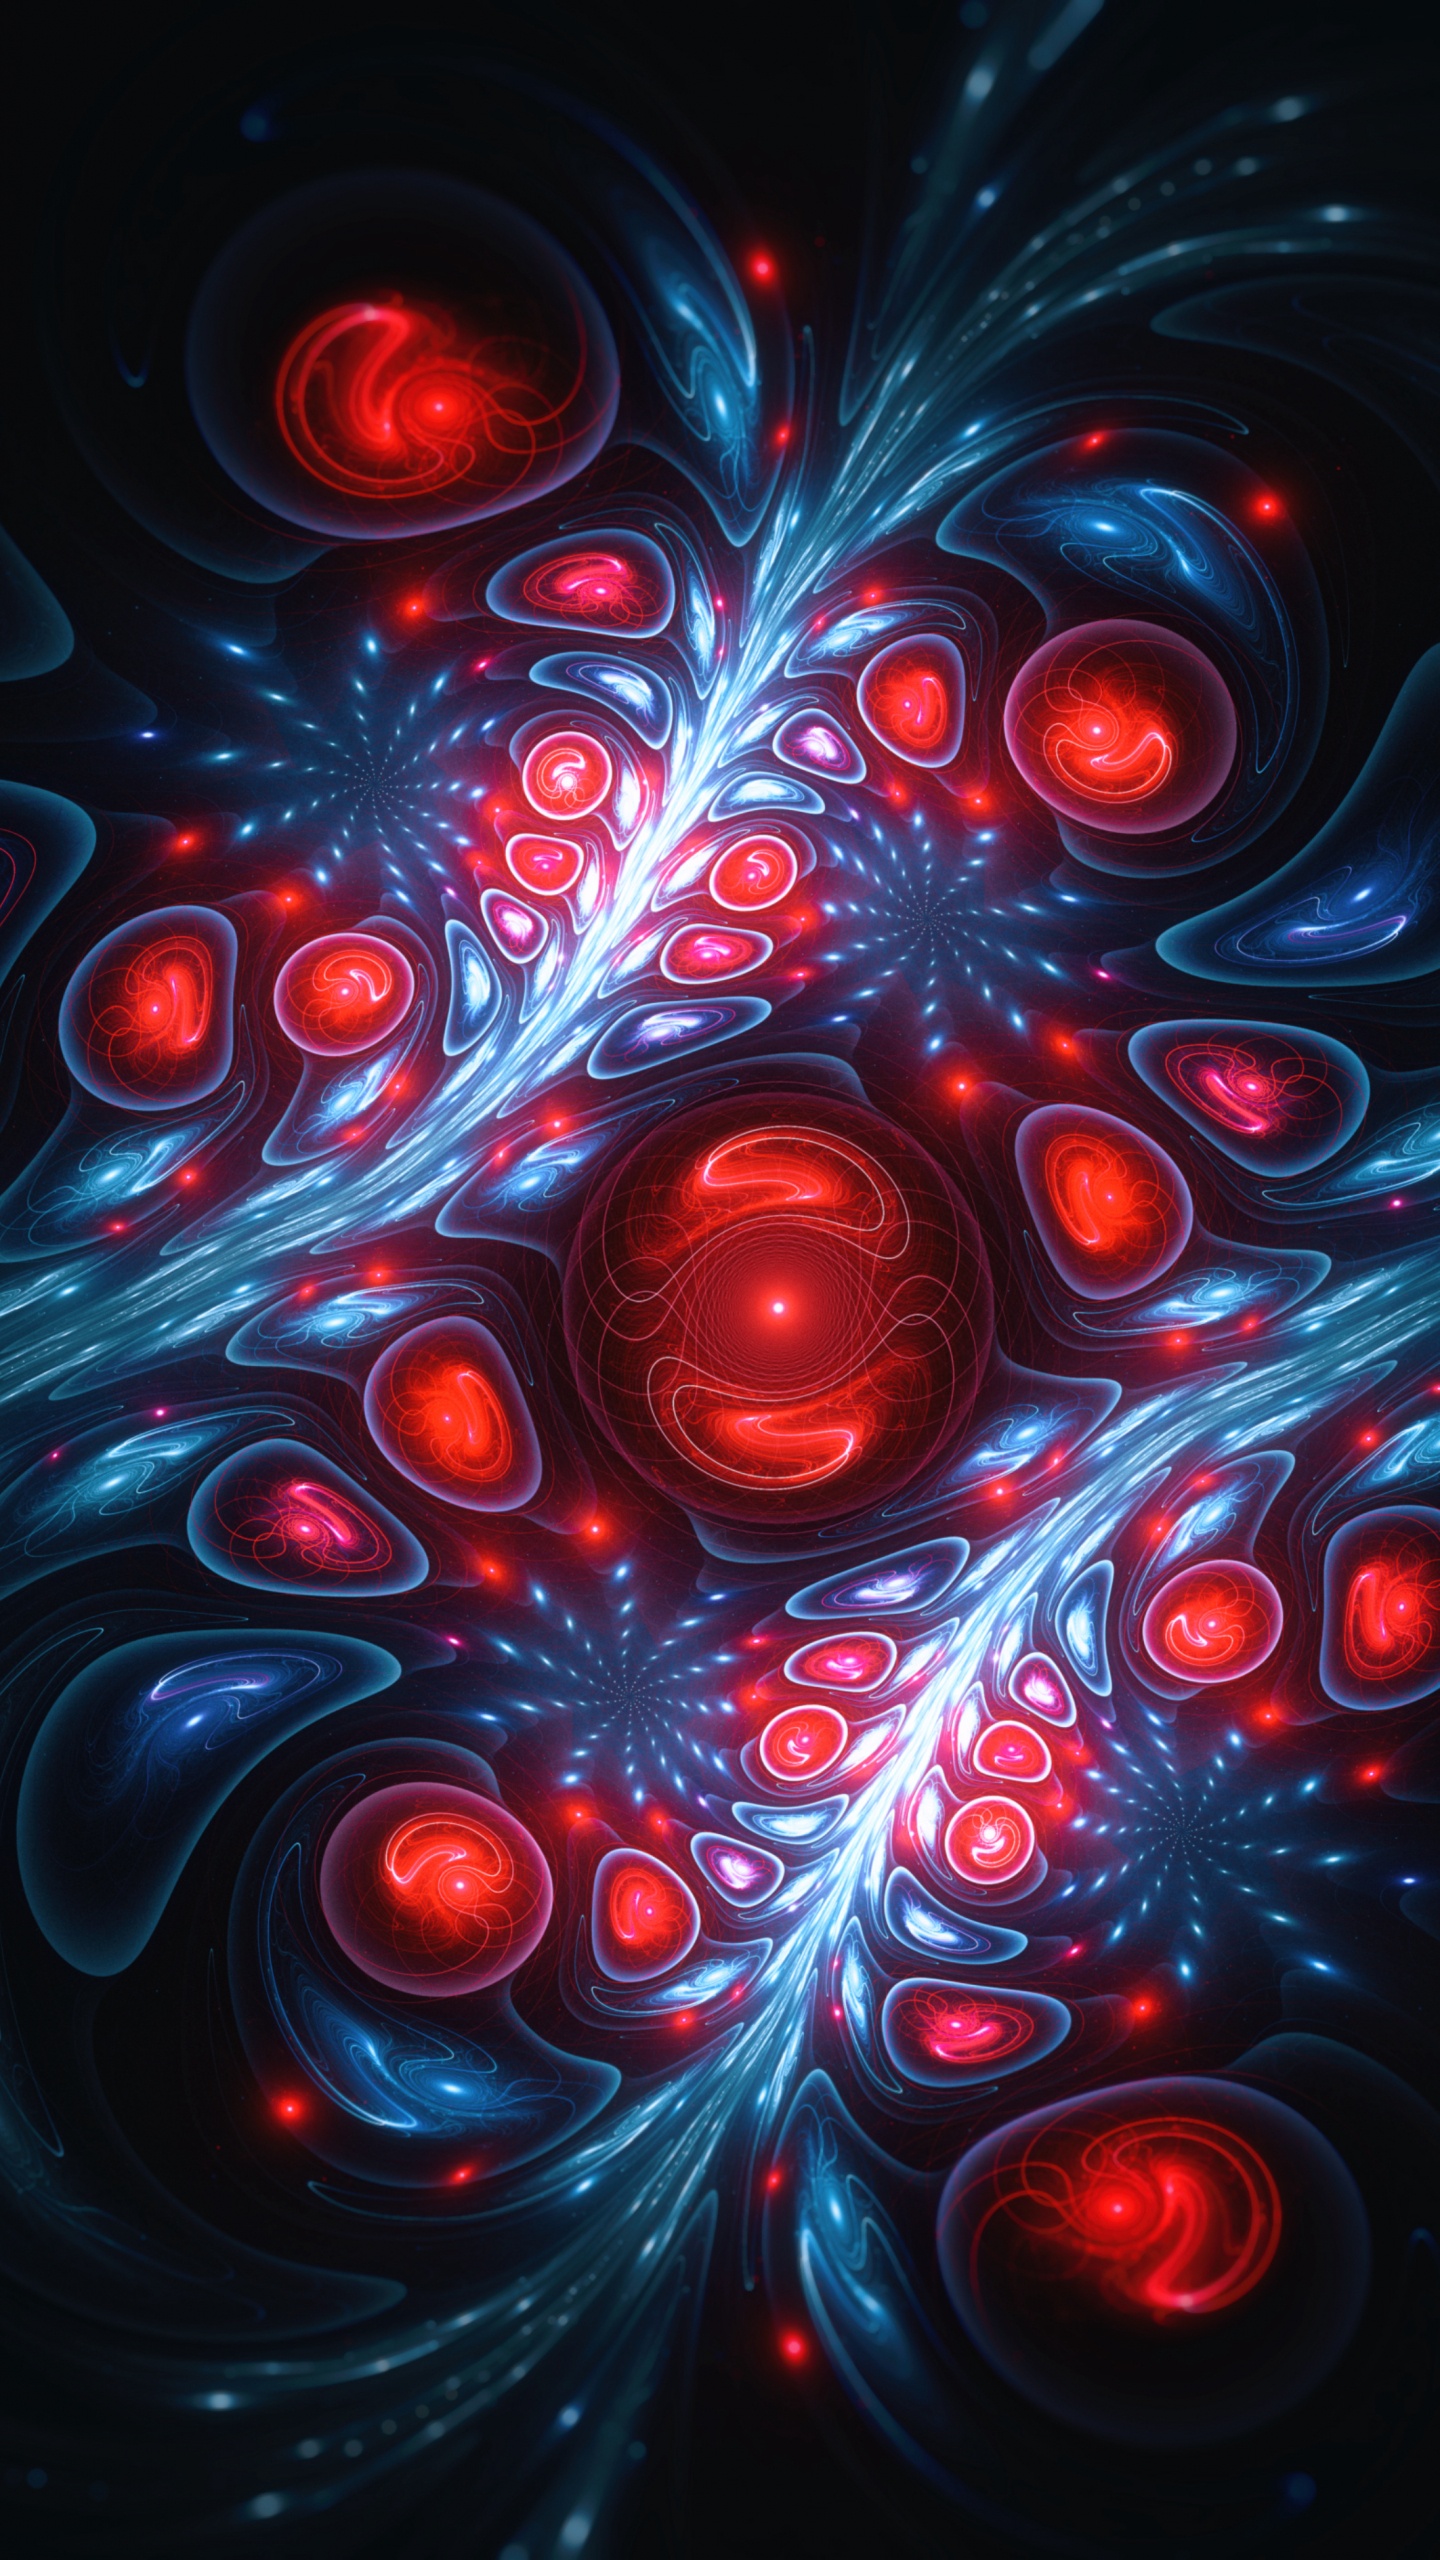 Red and Black Abstract Painting. Wallpaper in 1440x2560 Resolution